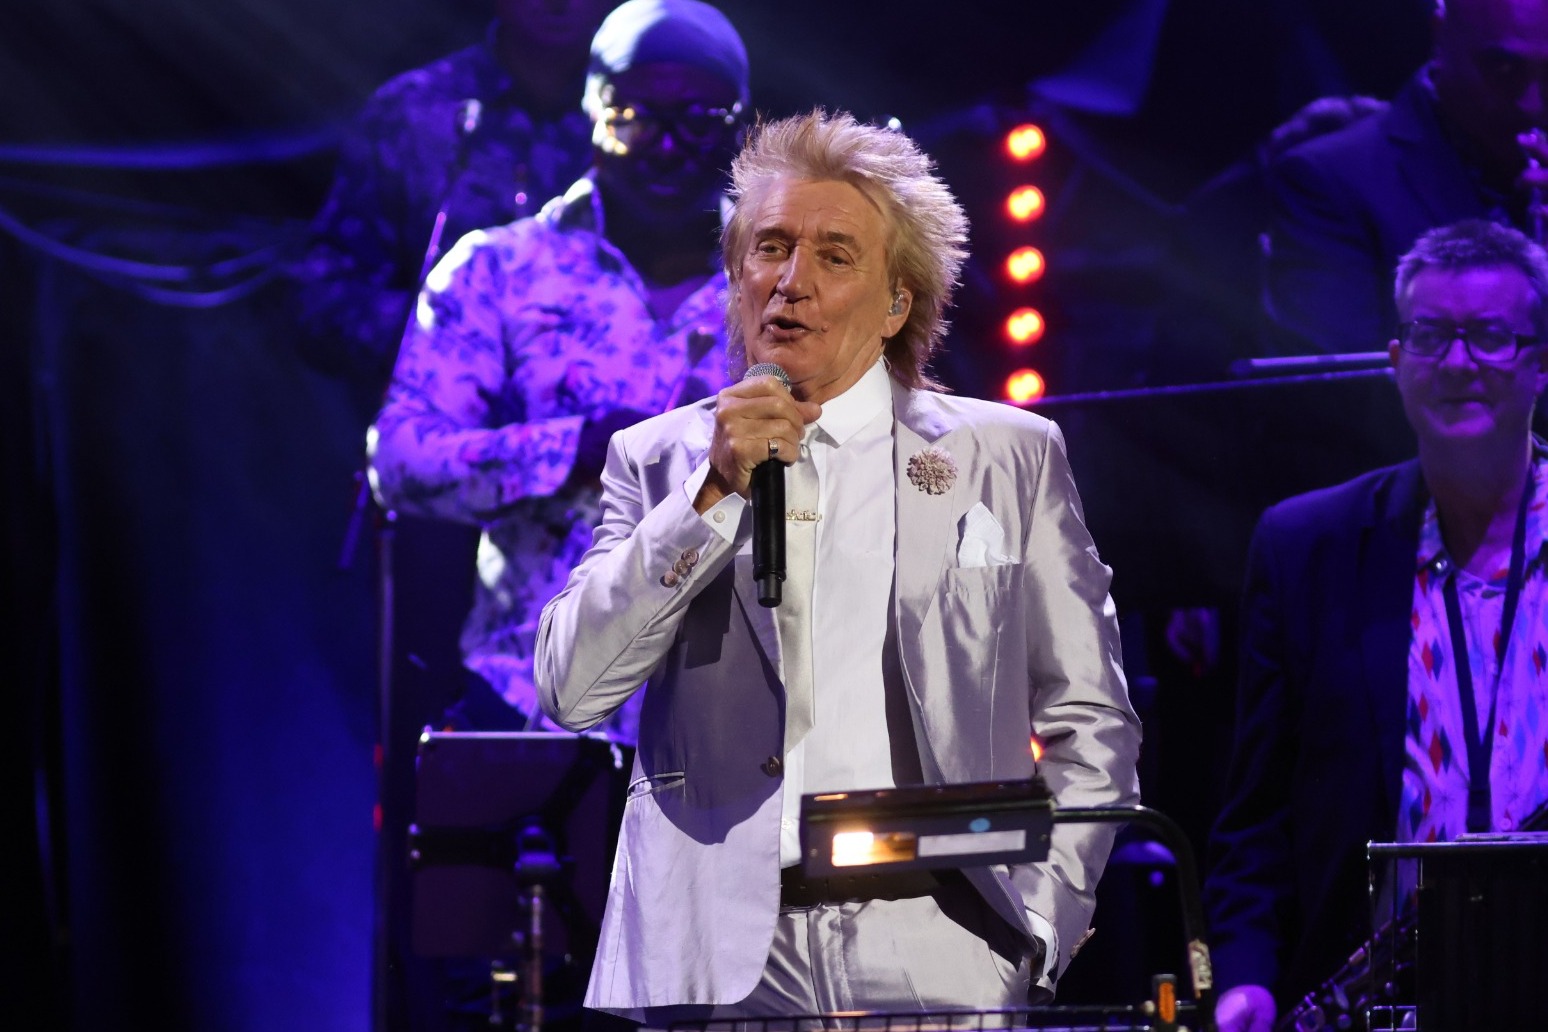 Rod Stewart and Van Morrison raise the roof at prostate cancer charity concert